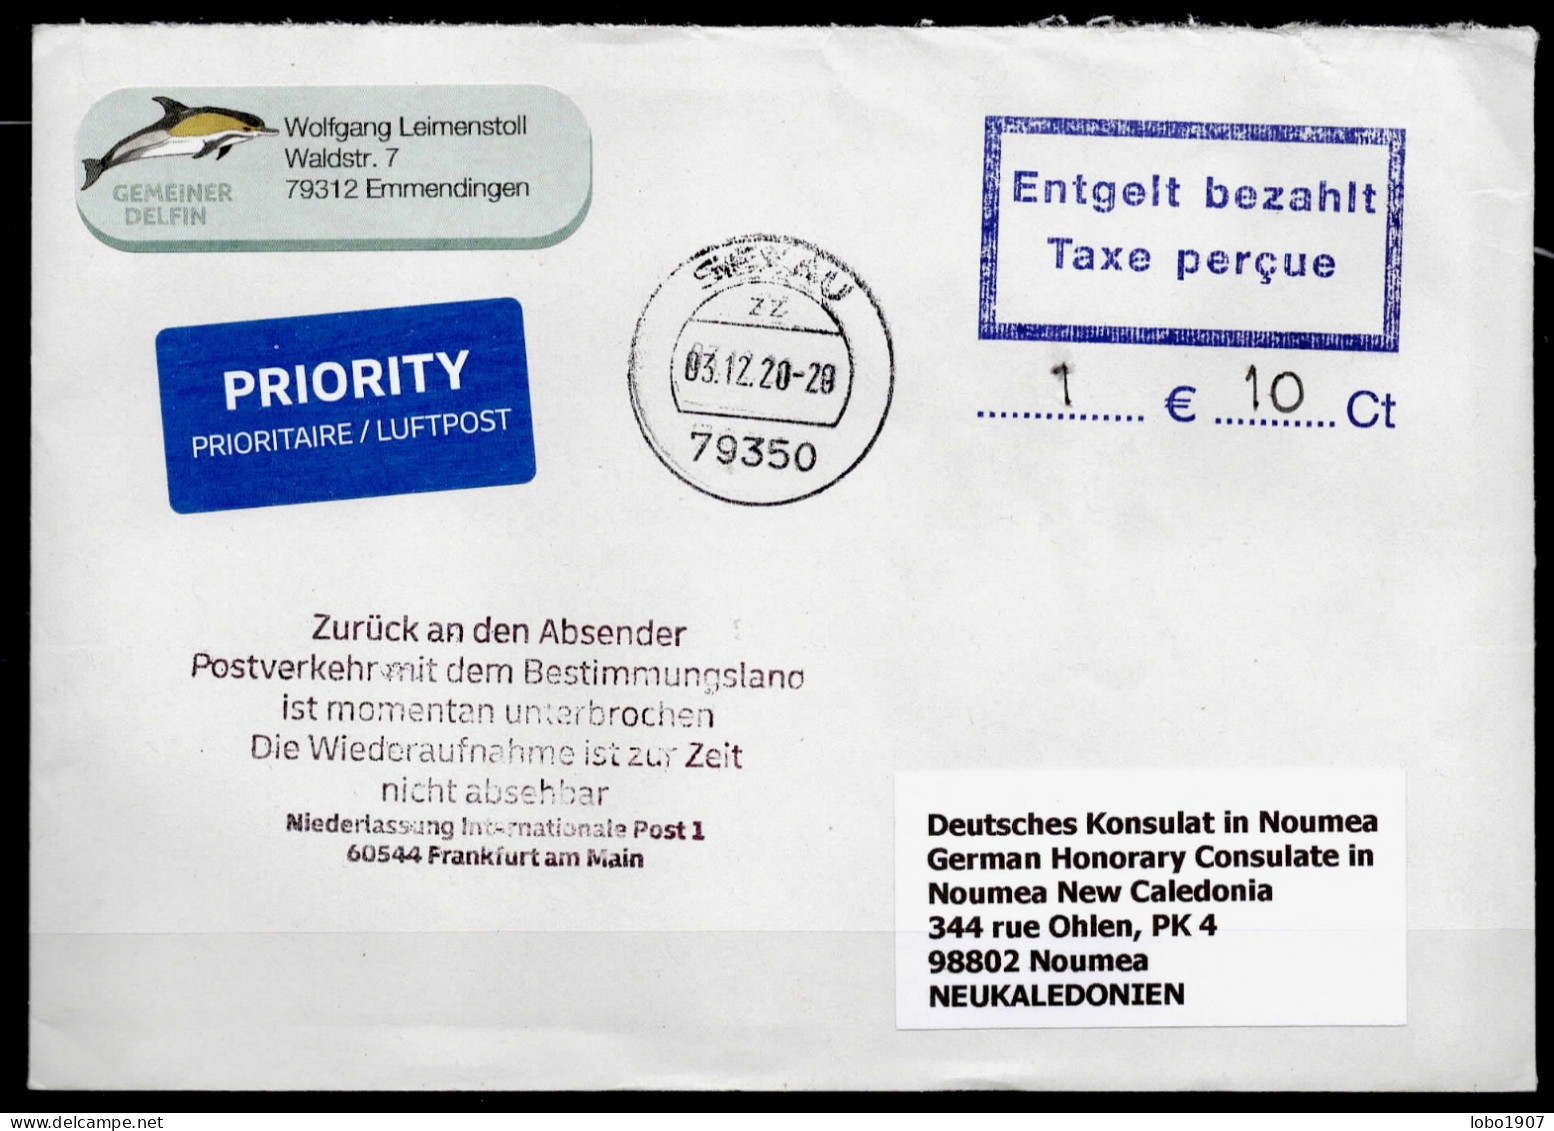 Corona Covid 19 Postal Service Interruption "Zurück An Den Absender.. " Reply Coupon Paid Cover To NOUMEA NEW CALEDINIA - Covers & Documents